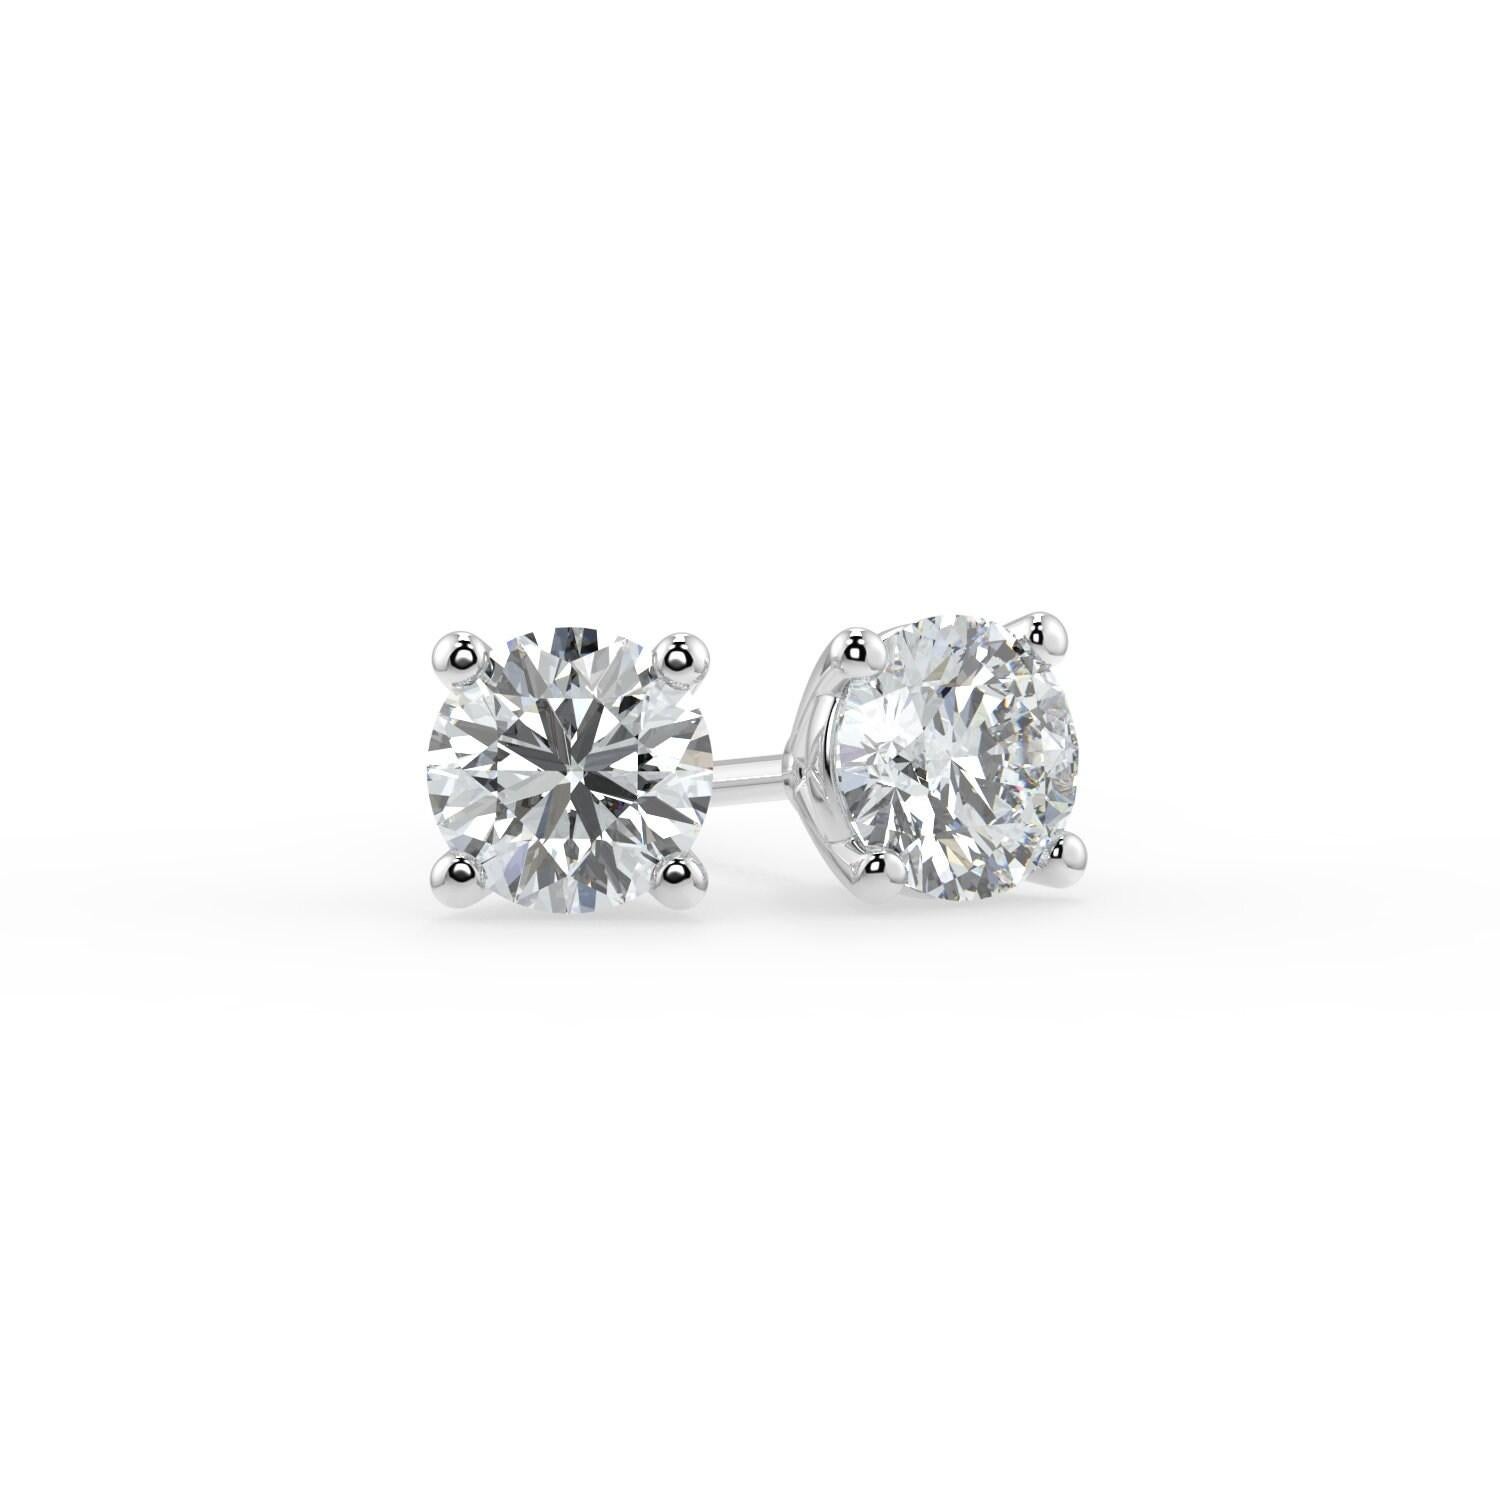 0.33 Ct Natural  Diamond  I1 Clarity Round Shape Solitaire 4 Prong Martini Style 

Specifications:
Metal: 14k Gold 
Diamond Shape: Round
Natural Diamond carat weight: 0.33 CTW 
Diamond Clarity: I1

Aamiaa collection of diamond earrings is designed